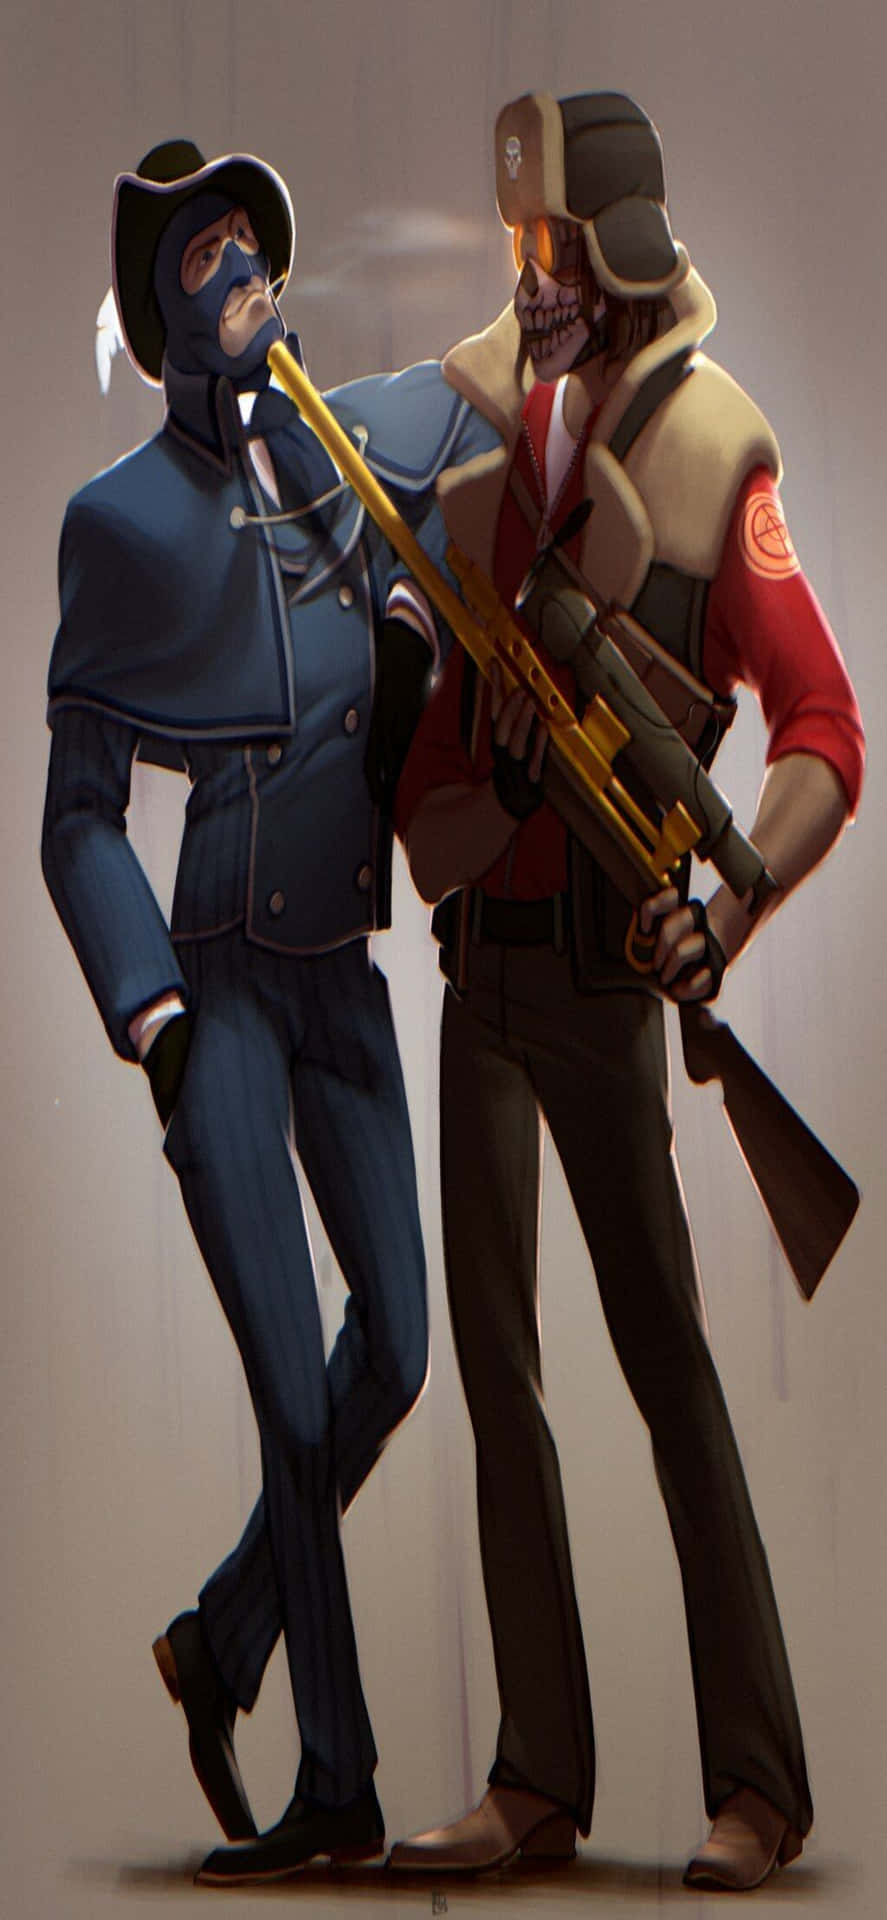 Iphone Xs Tf2 Background Sniper Aiming At The Spy